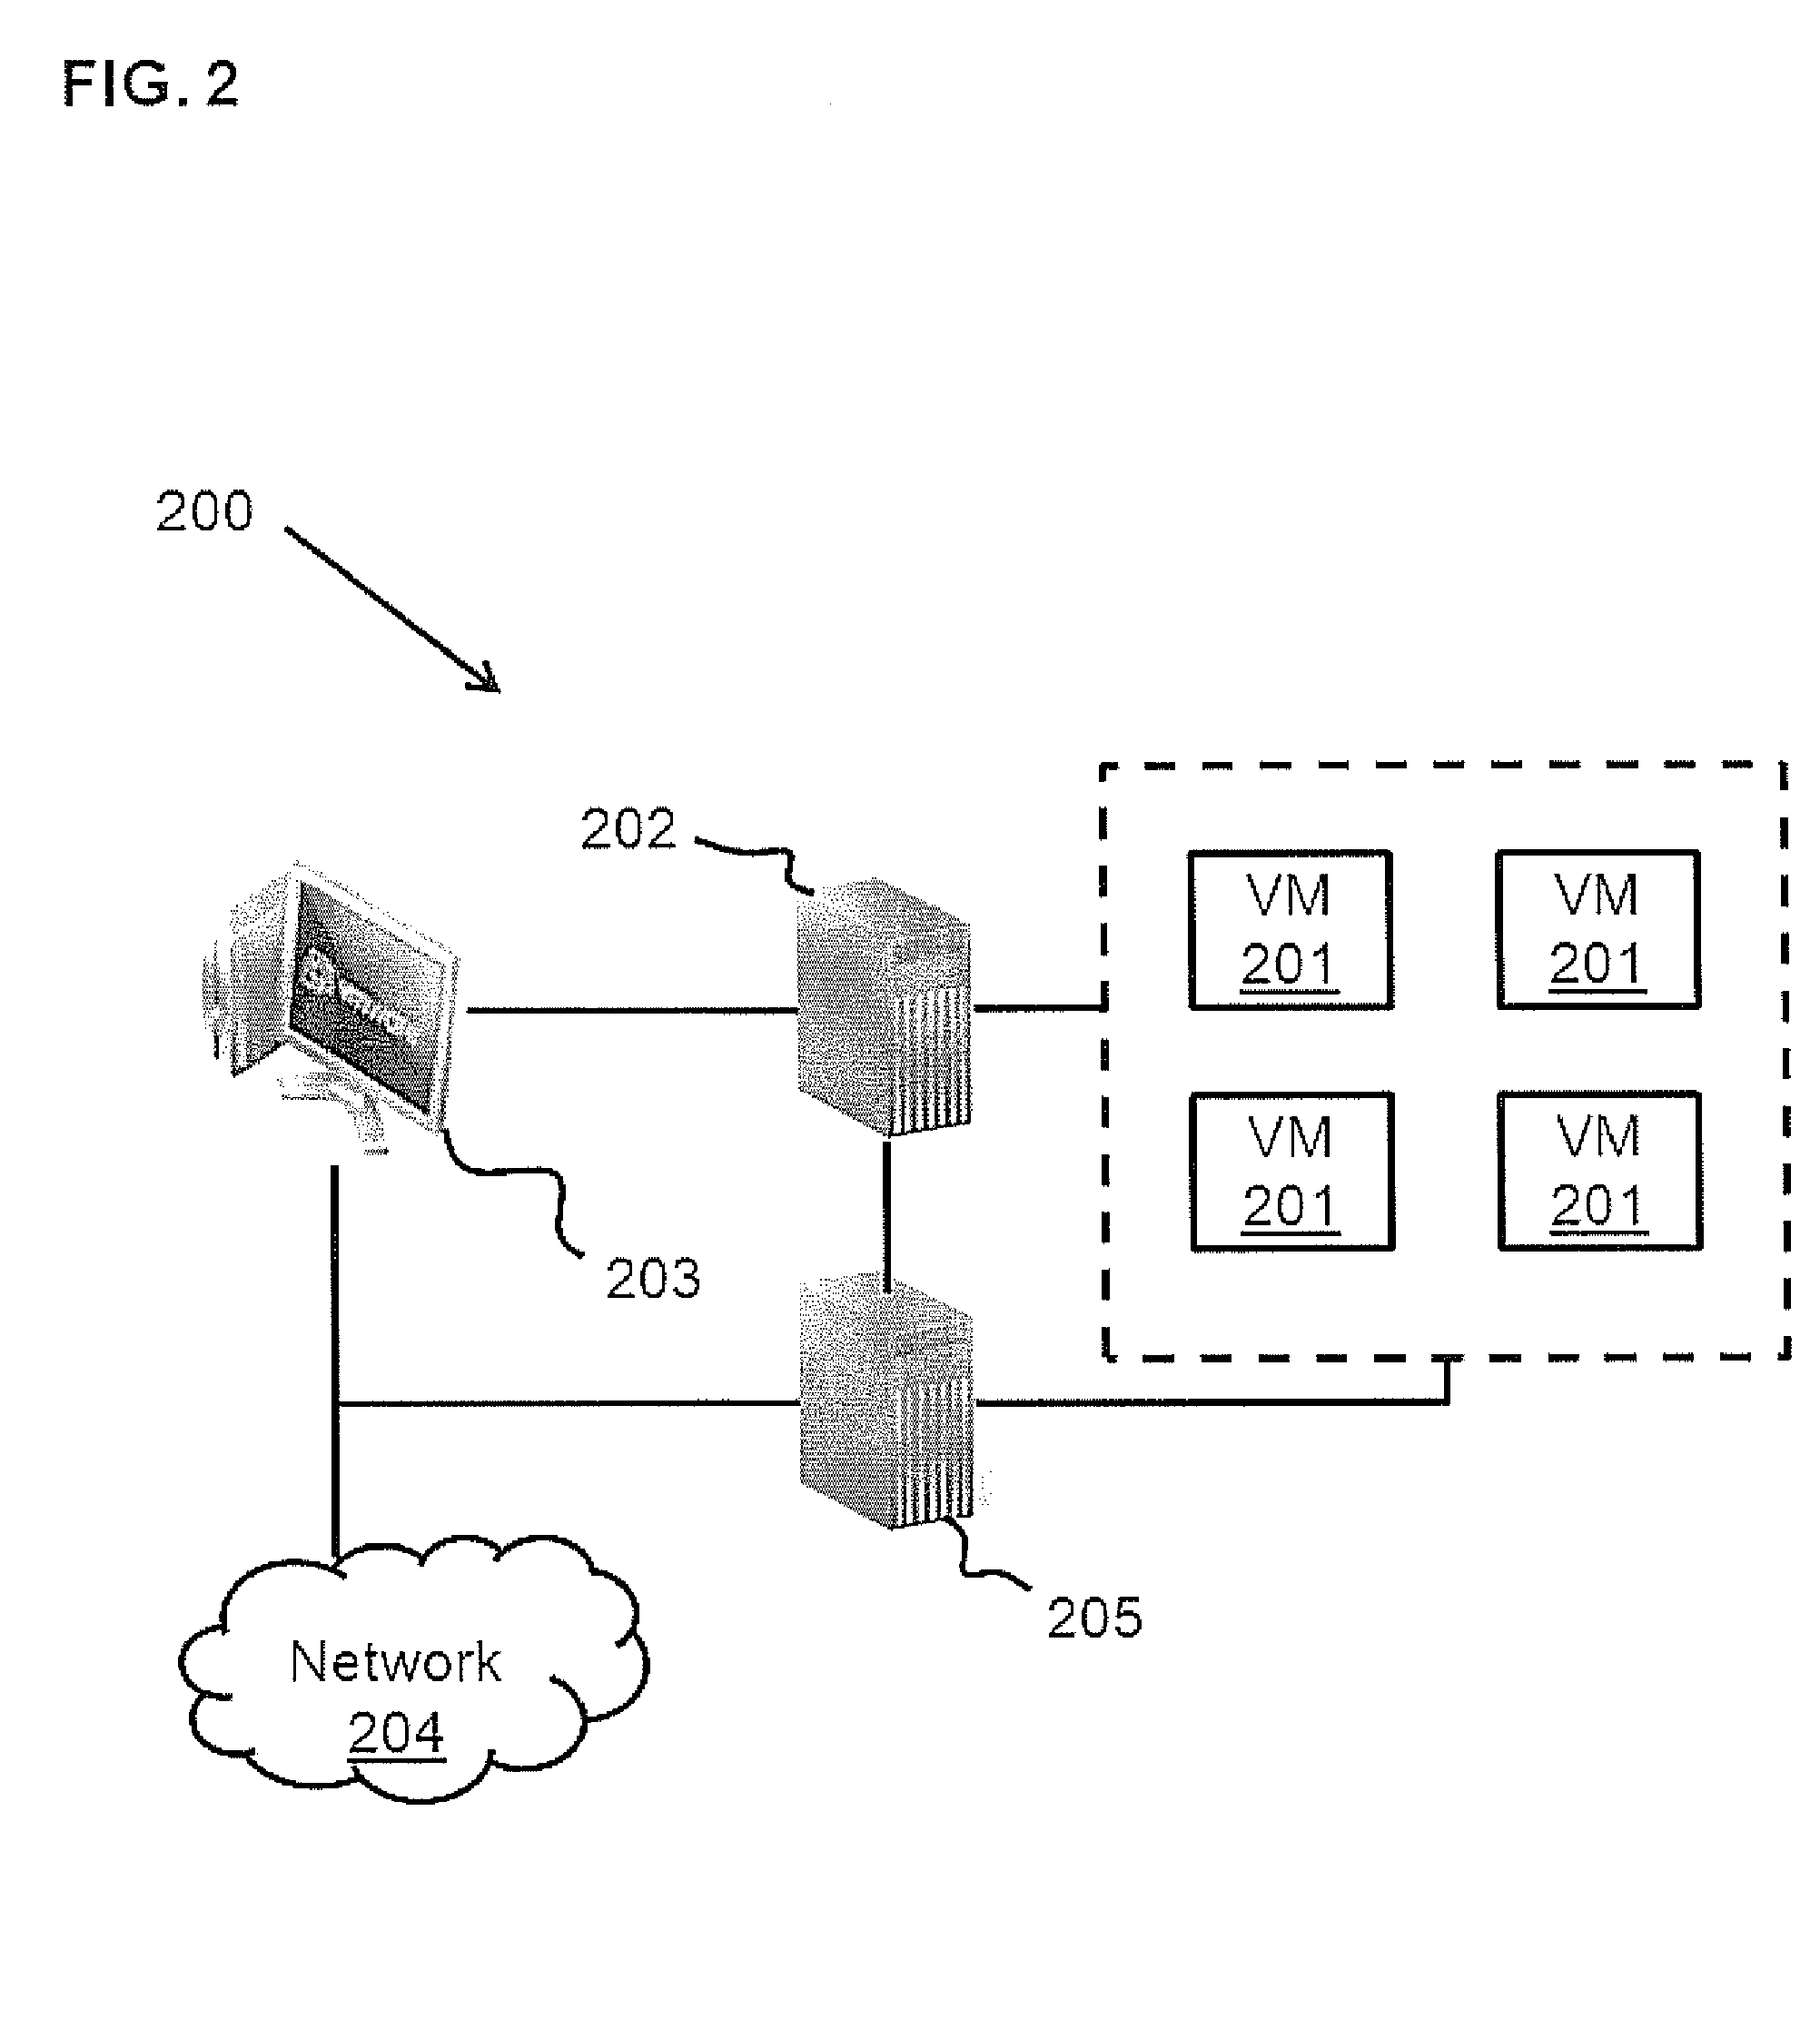 Method and apparatus for provisioning of resources to support applications and their varying demands